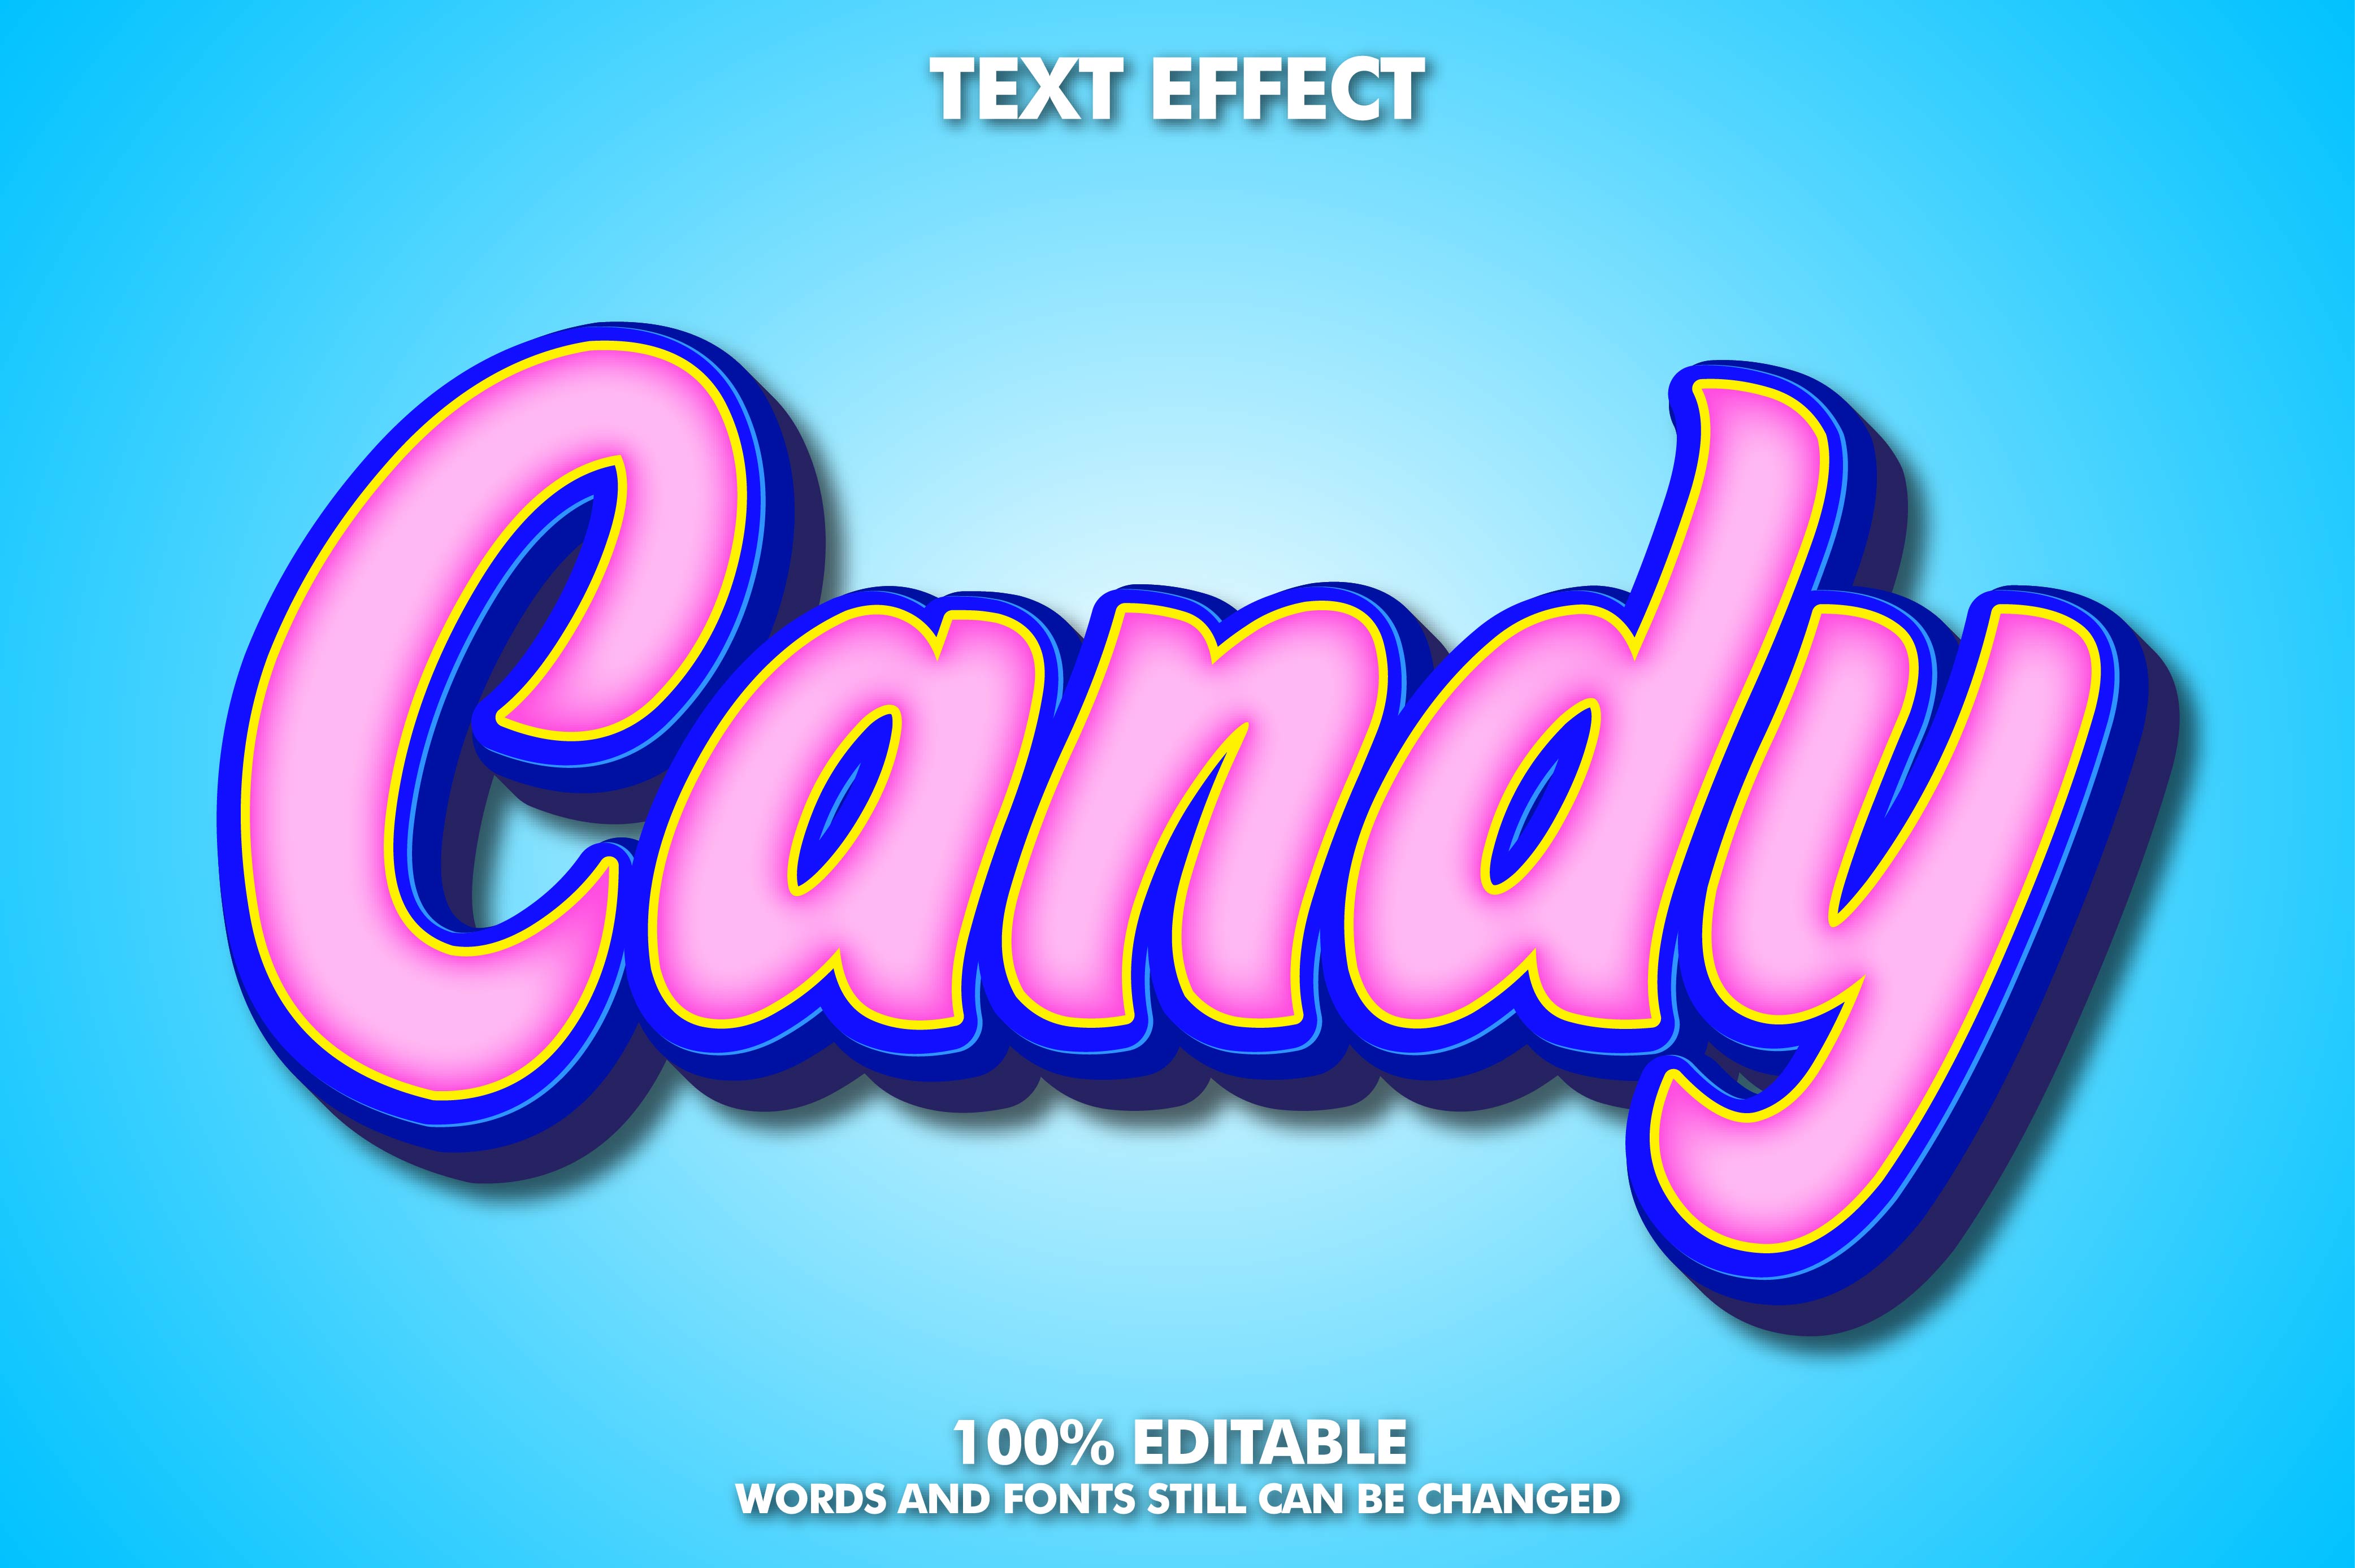 Editable text Effect. Стиль текста Candy. Candy текст.